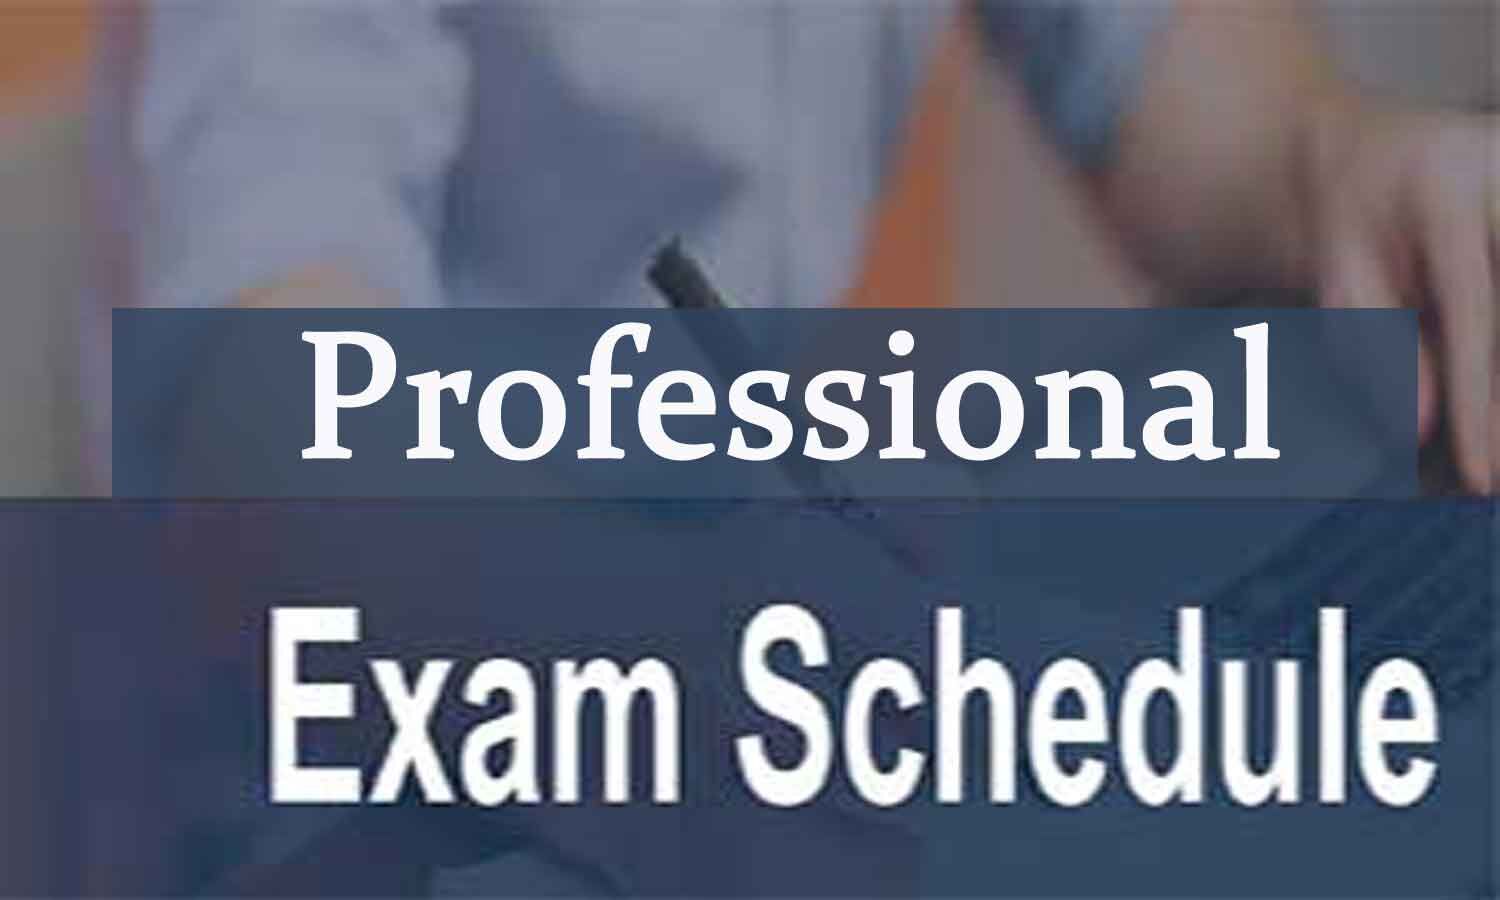 Professional, Final Exams postponed for May 2020; AIIMS issues notice on schedule